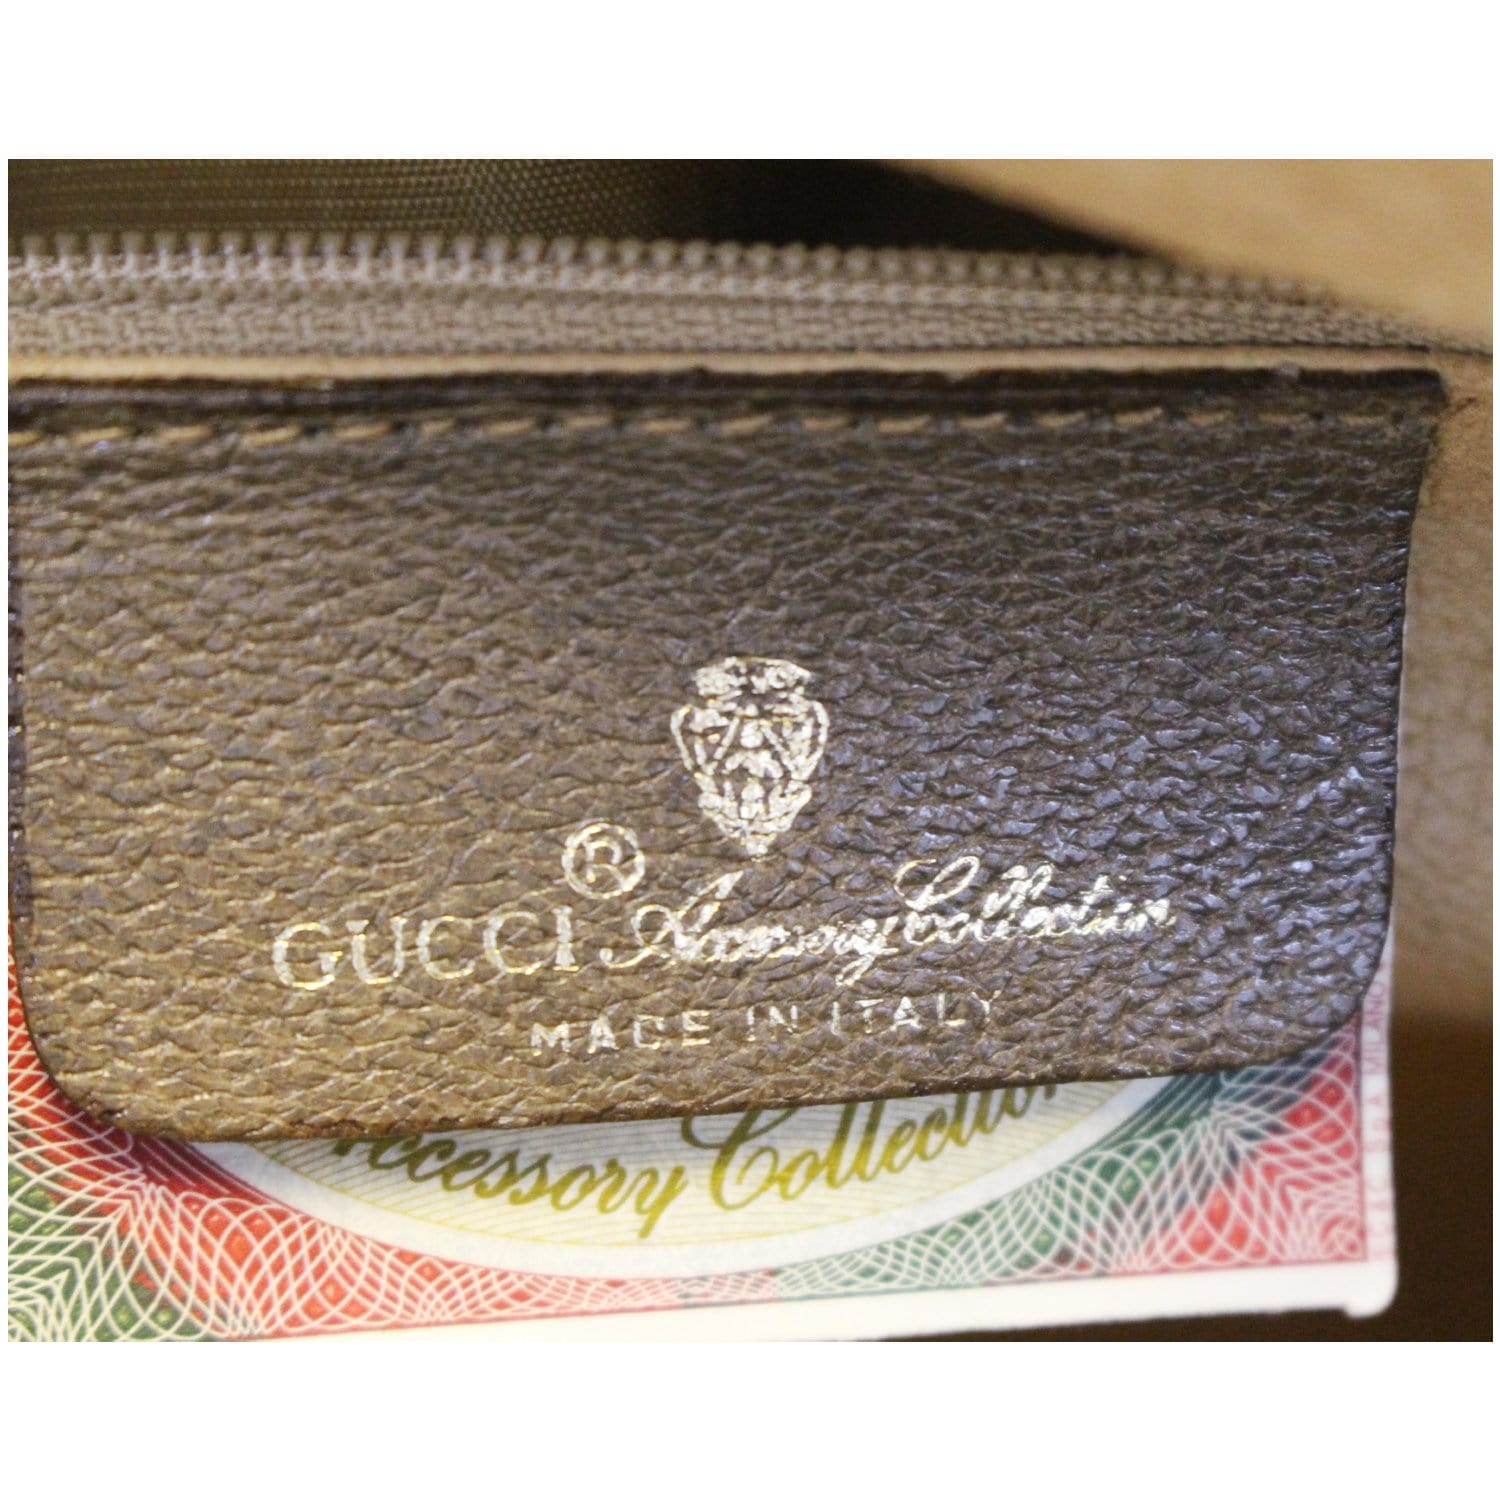 Gucci purse and wallet combo. Authentic duo with receipt and price tag, and  dust bag. Excellent condition Used 4 times. Check out my other offers. for